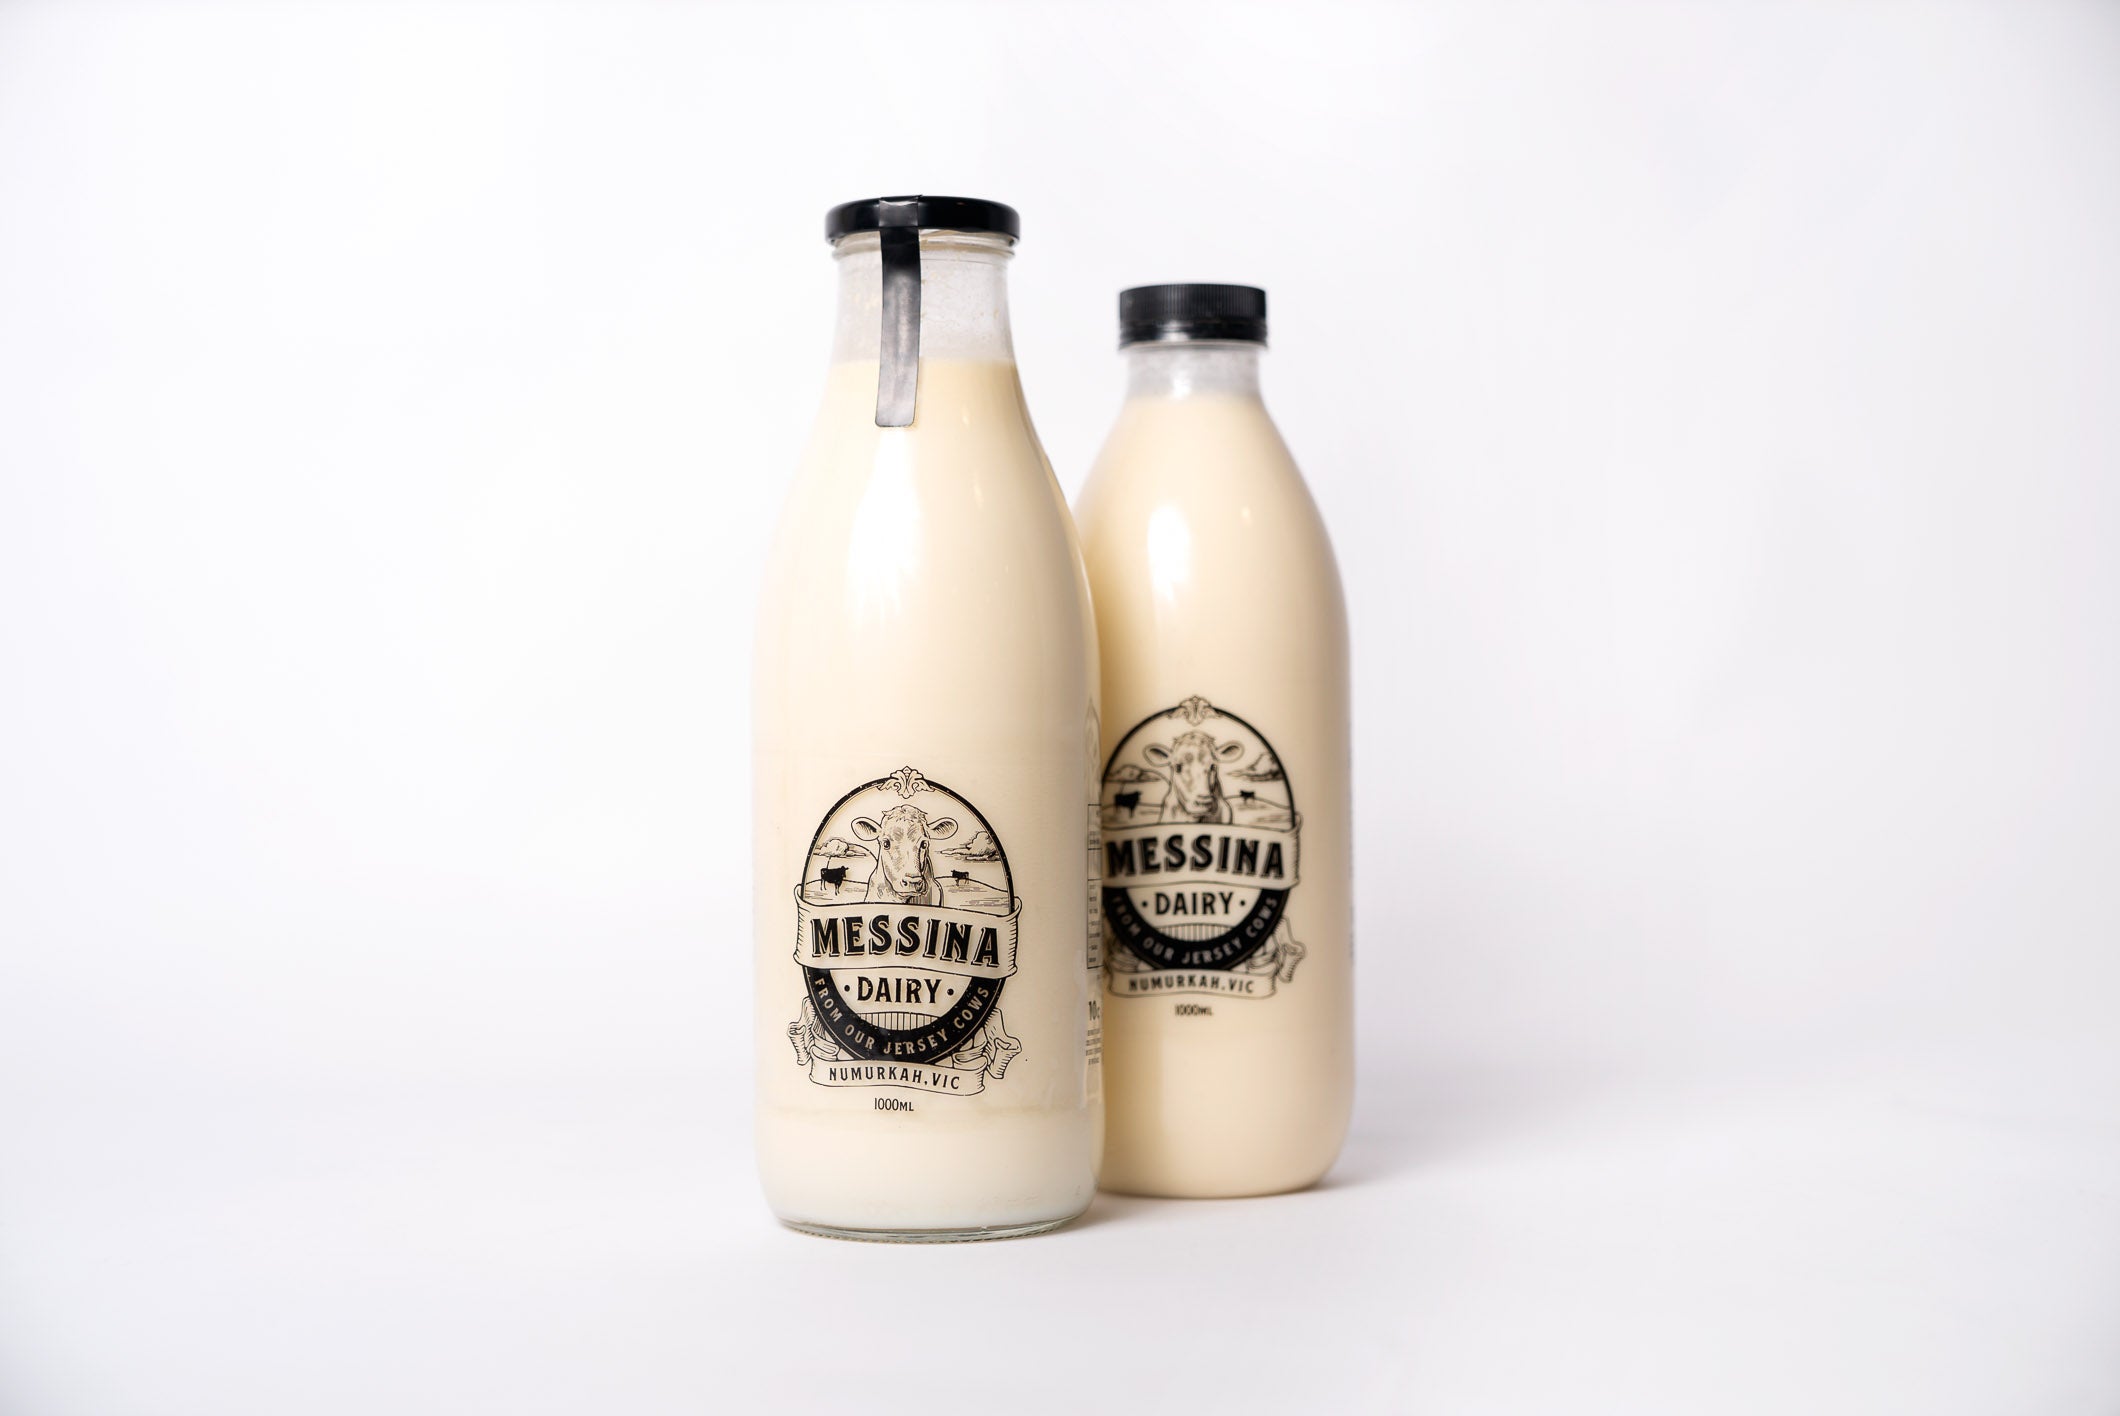 Messina Jersey Milk Is A State Winner In The 2020 Delicious Produce Awards